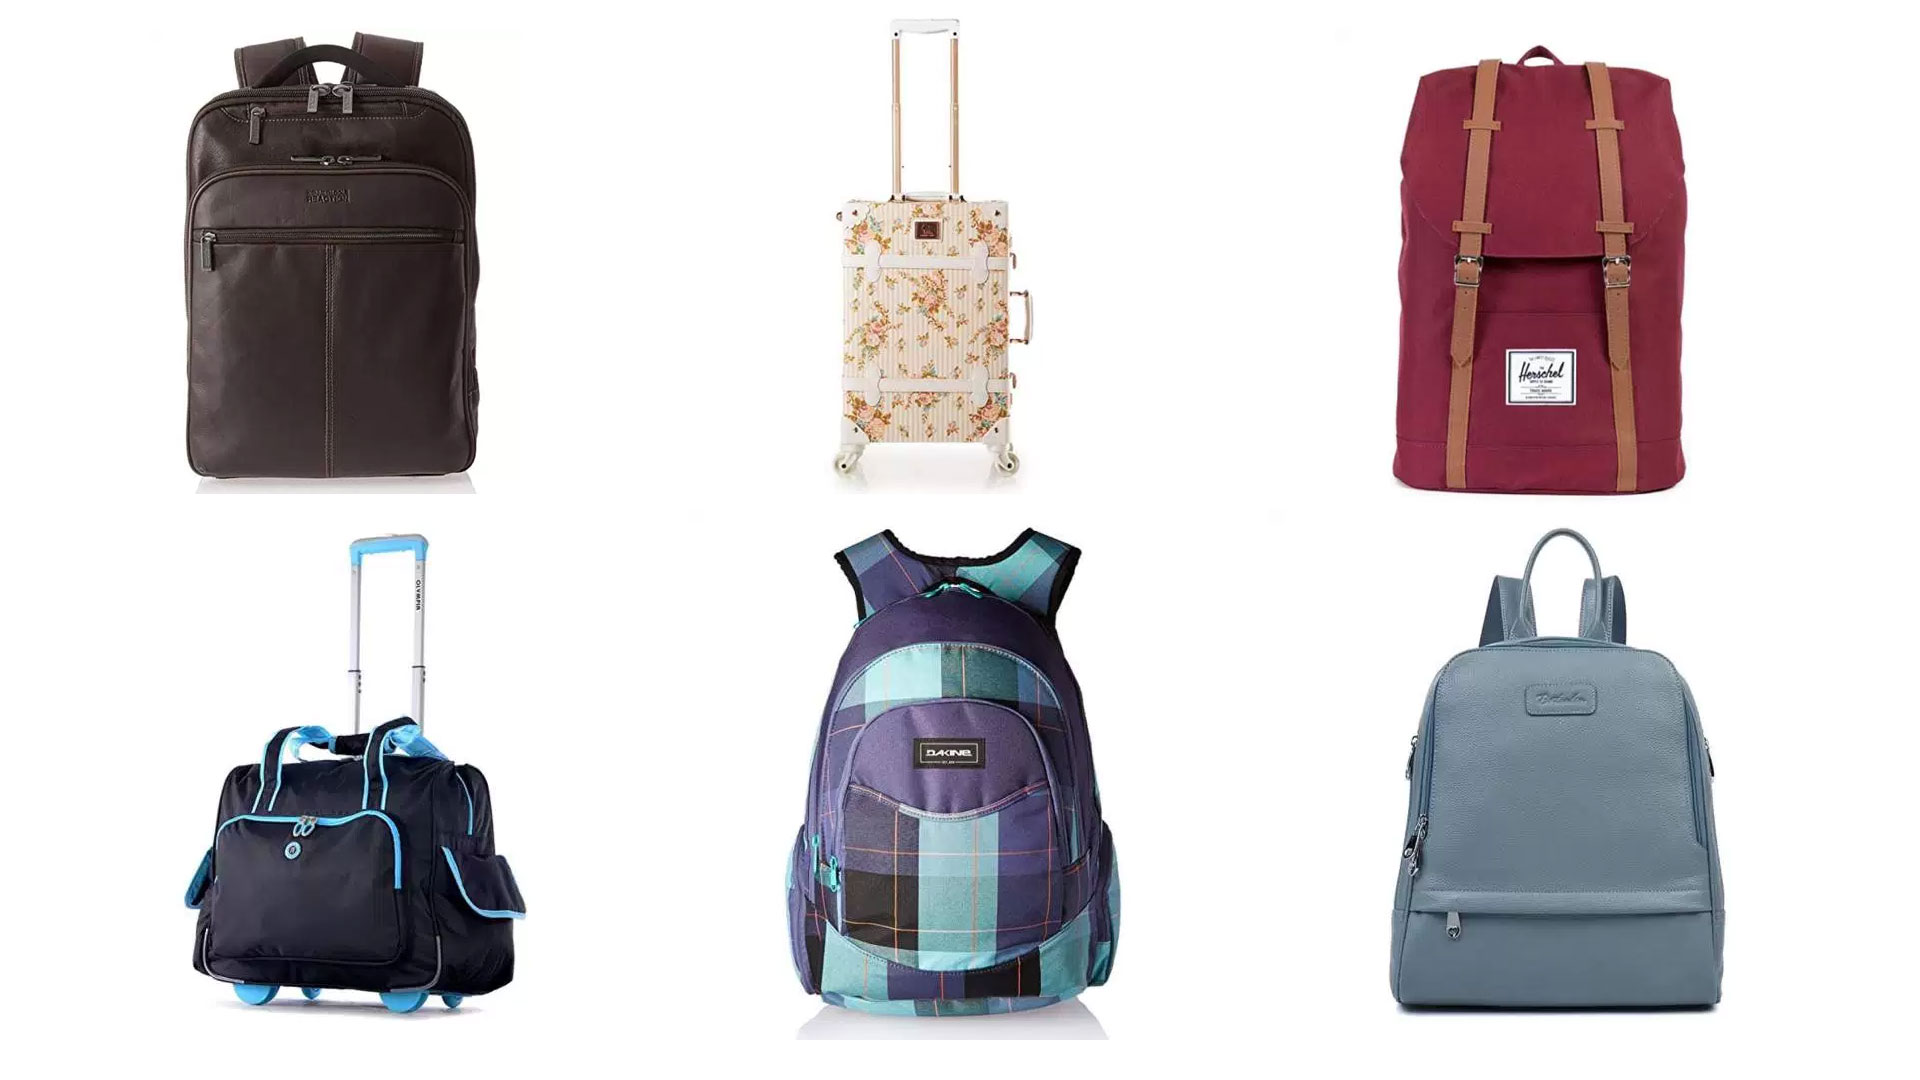 Cute Luggage: Top 10 Best Bags, Suitcases & Sets